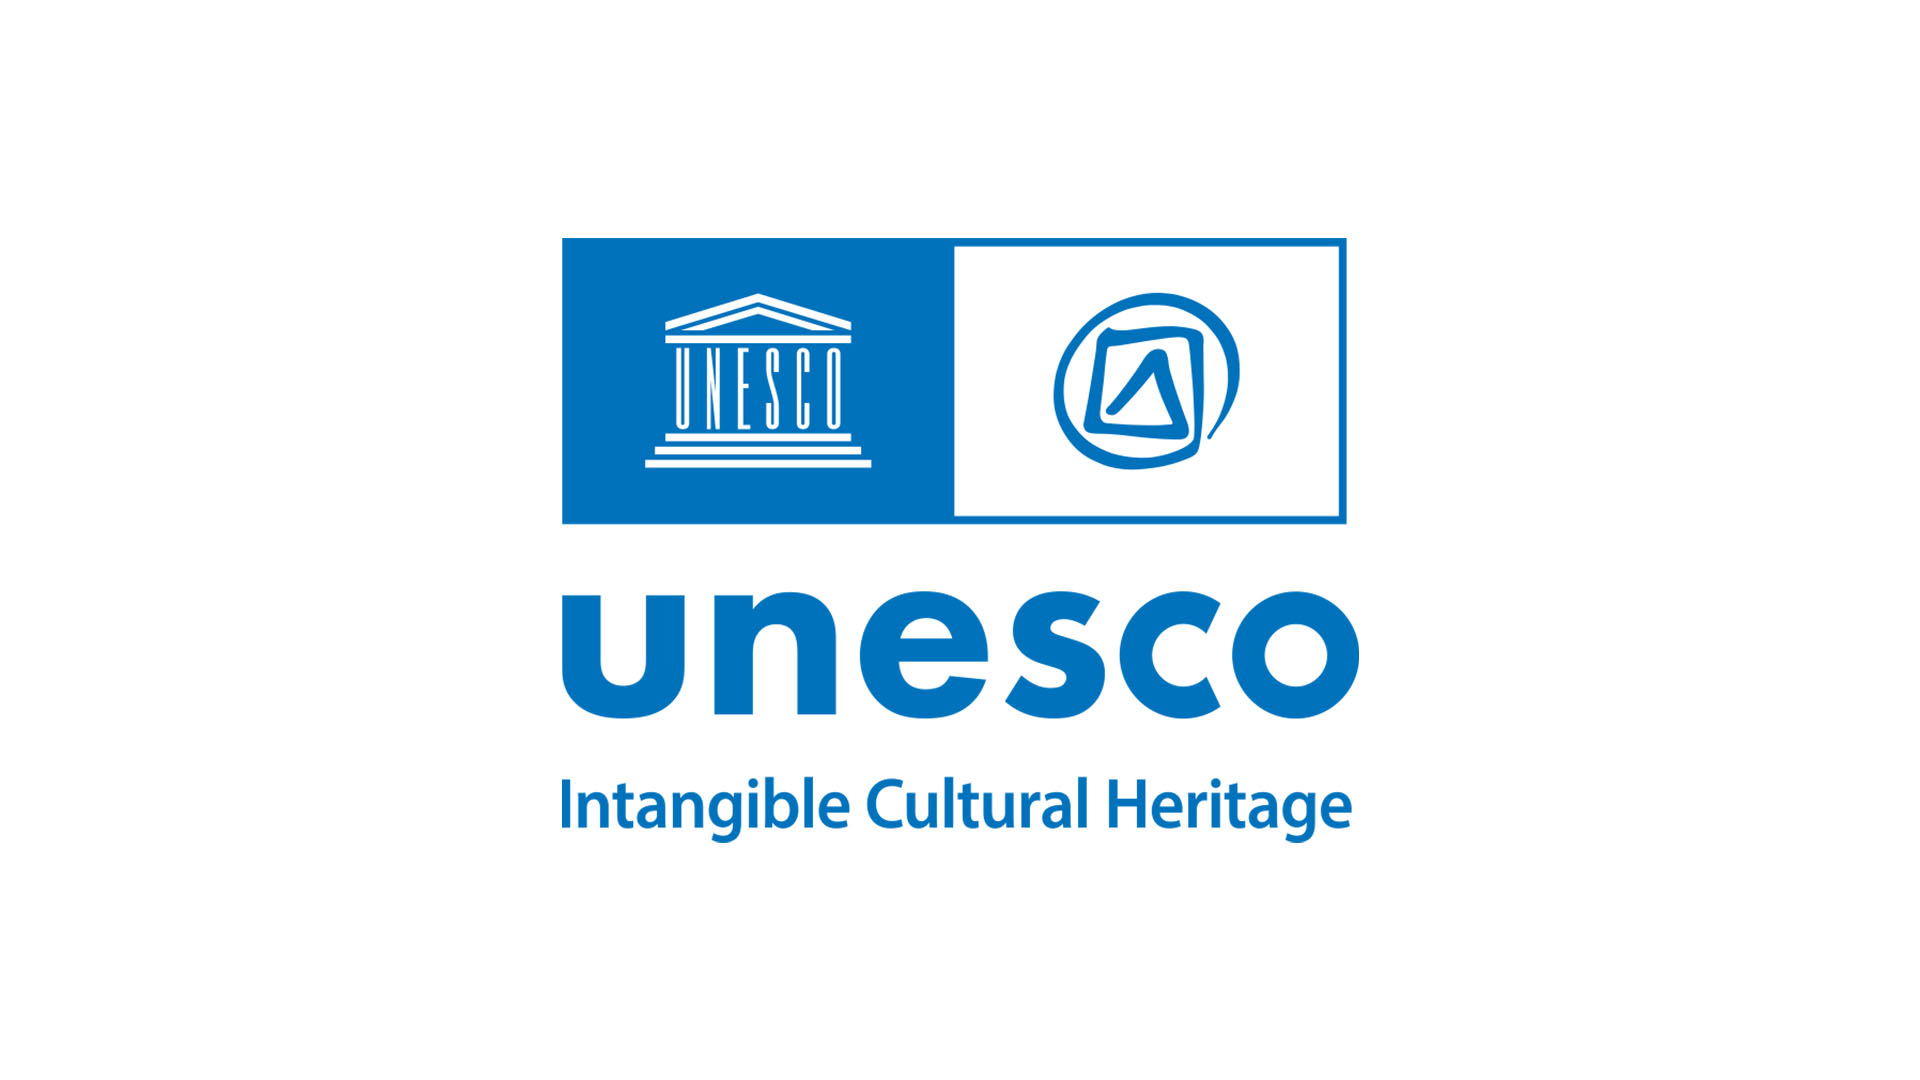 What is Intangible Cultural Heritage?